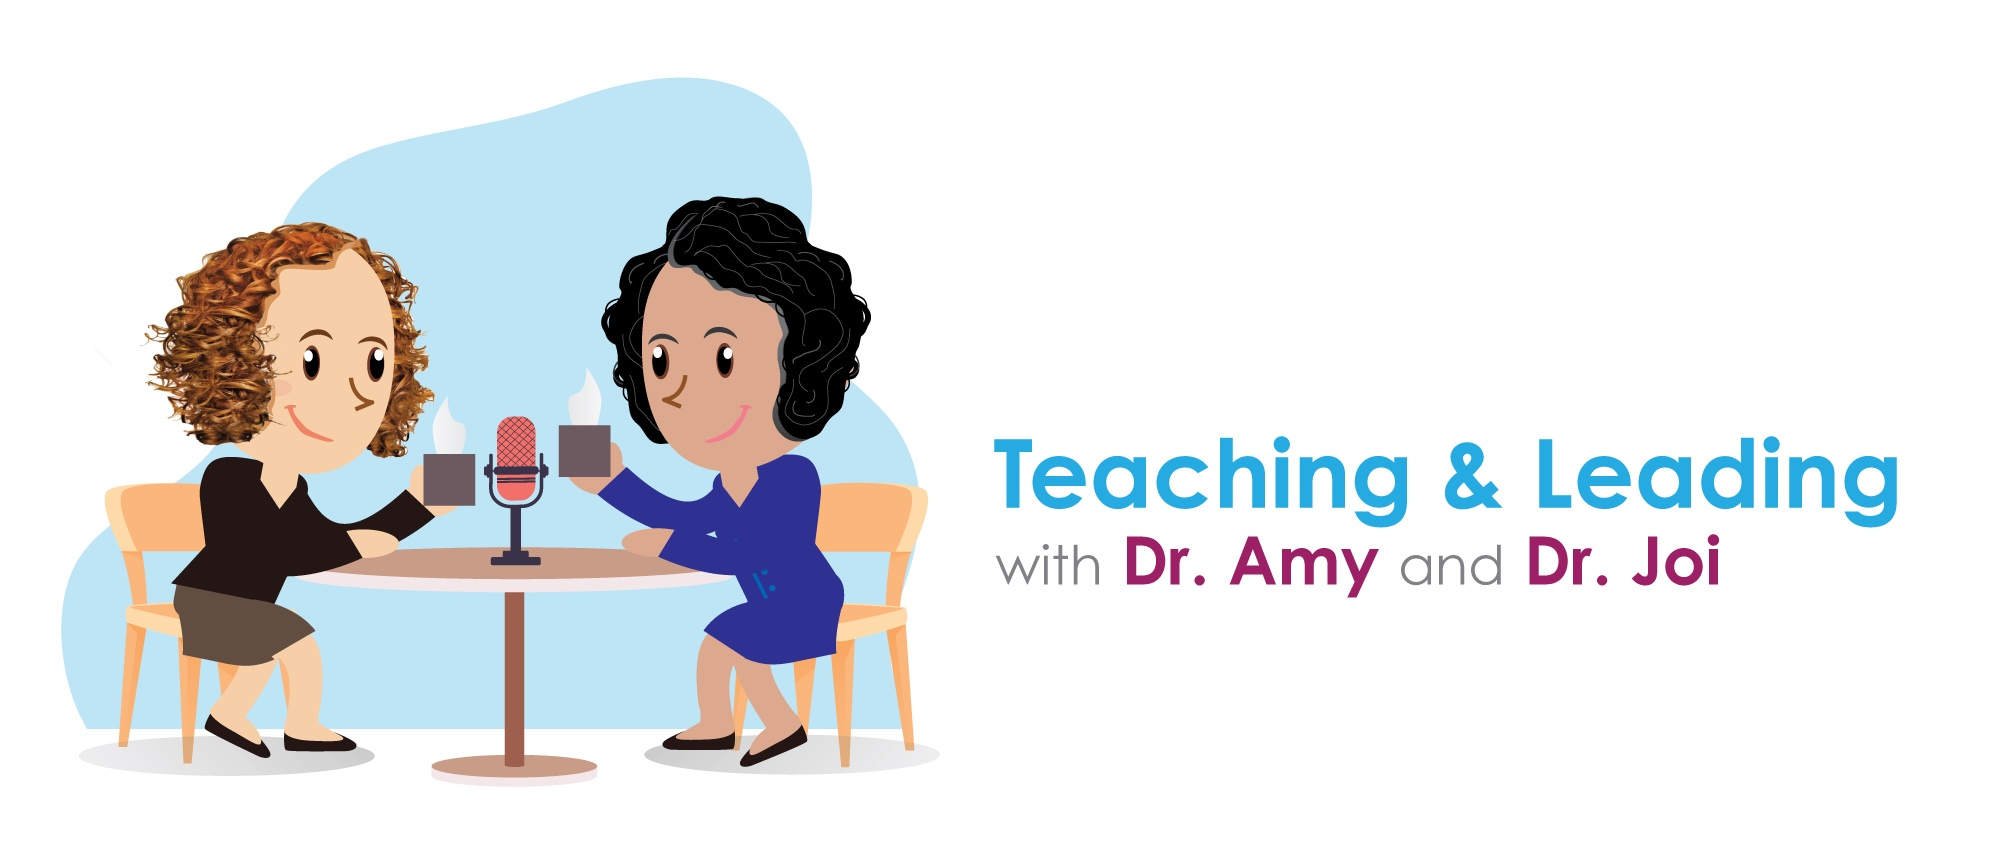 Teaching and Leading with Dr. Amy and Dr. Joi